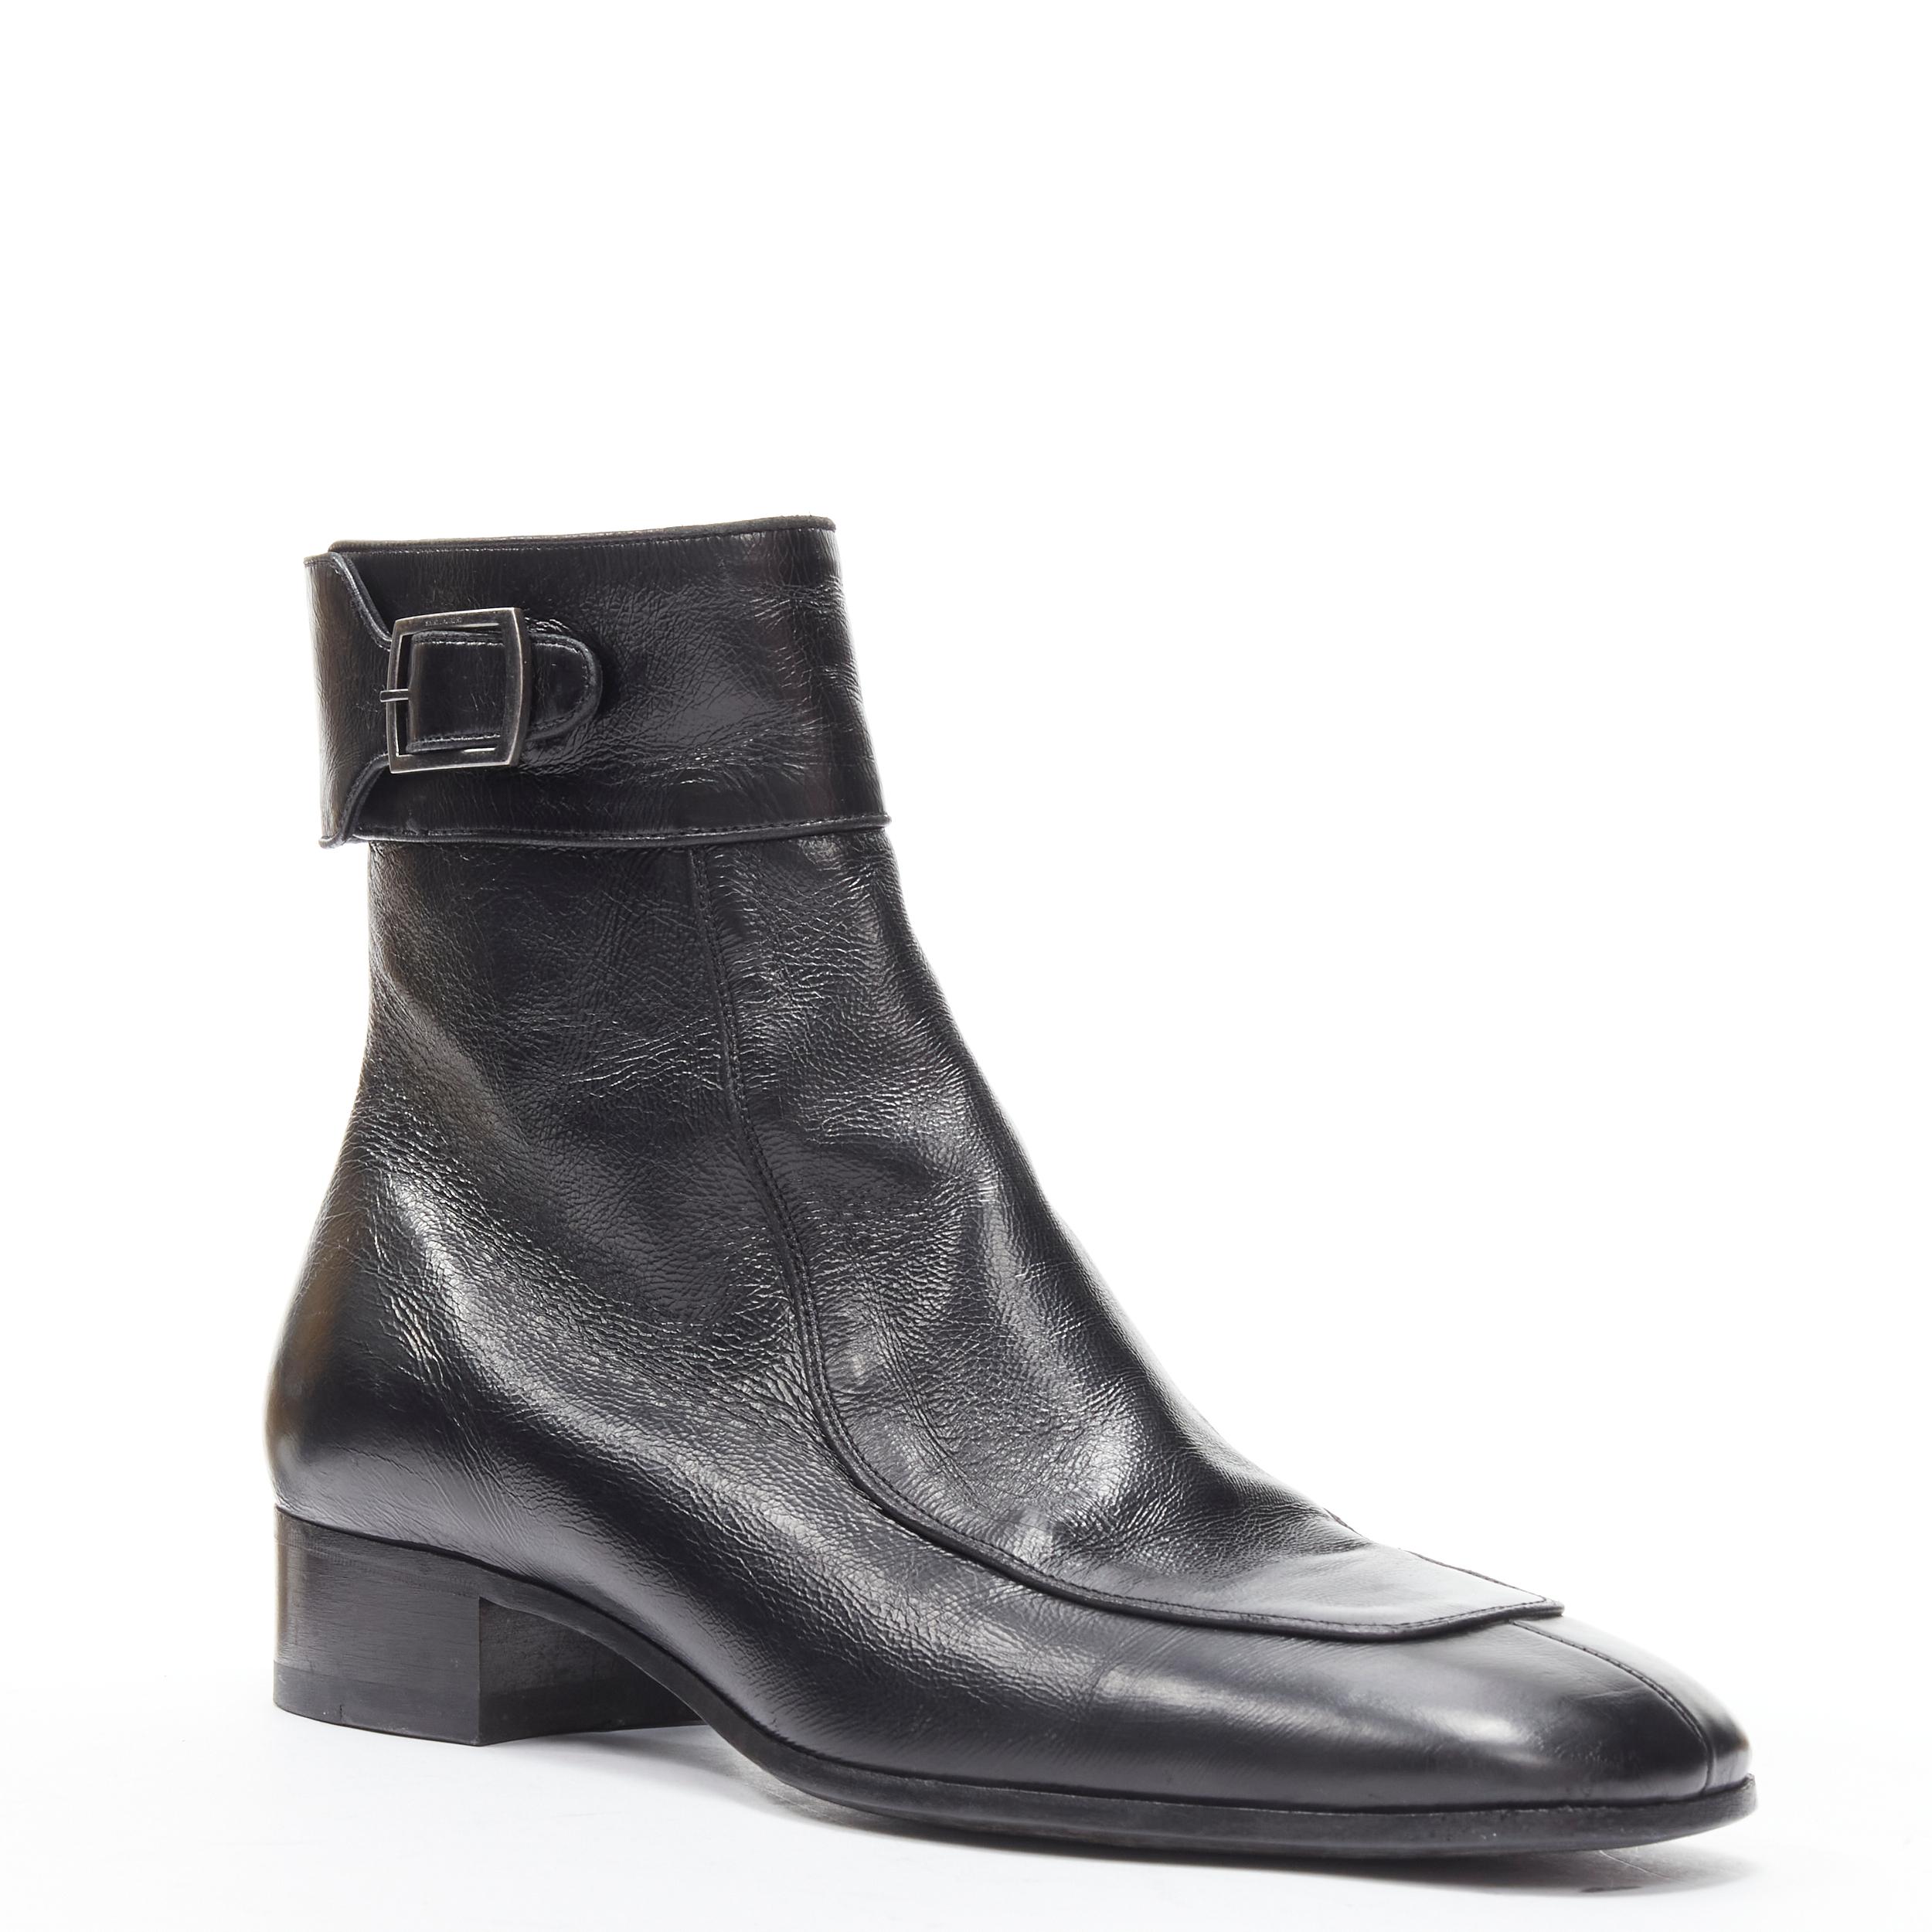 new SAINT LAURENT Miles 30 Age Bootie Baby Eighty black square toe boot EU44
Reference: TGAS/B01792
Brand: Saint Laurent
Model: Miles 30 Age Bootie
Collection: Fall Winter 2019 - Runway
Material: Leather
Color: Black
Pattern: Solid
Closure: